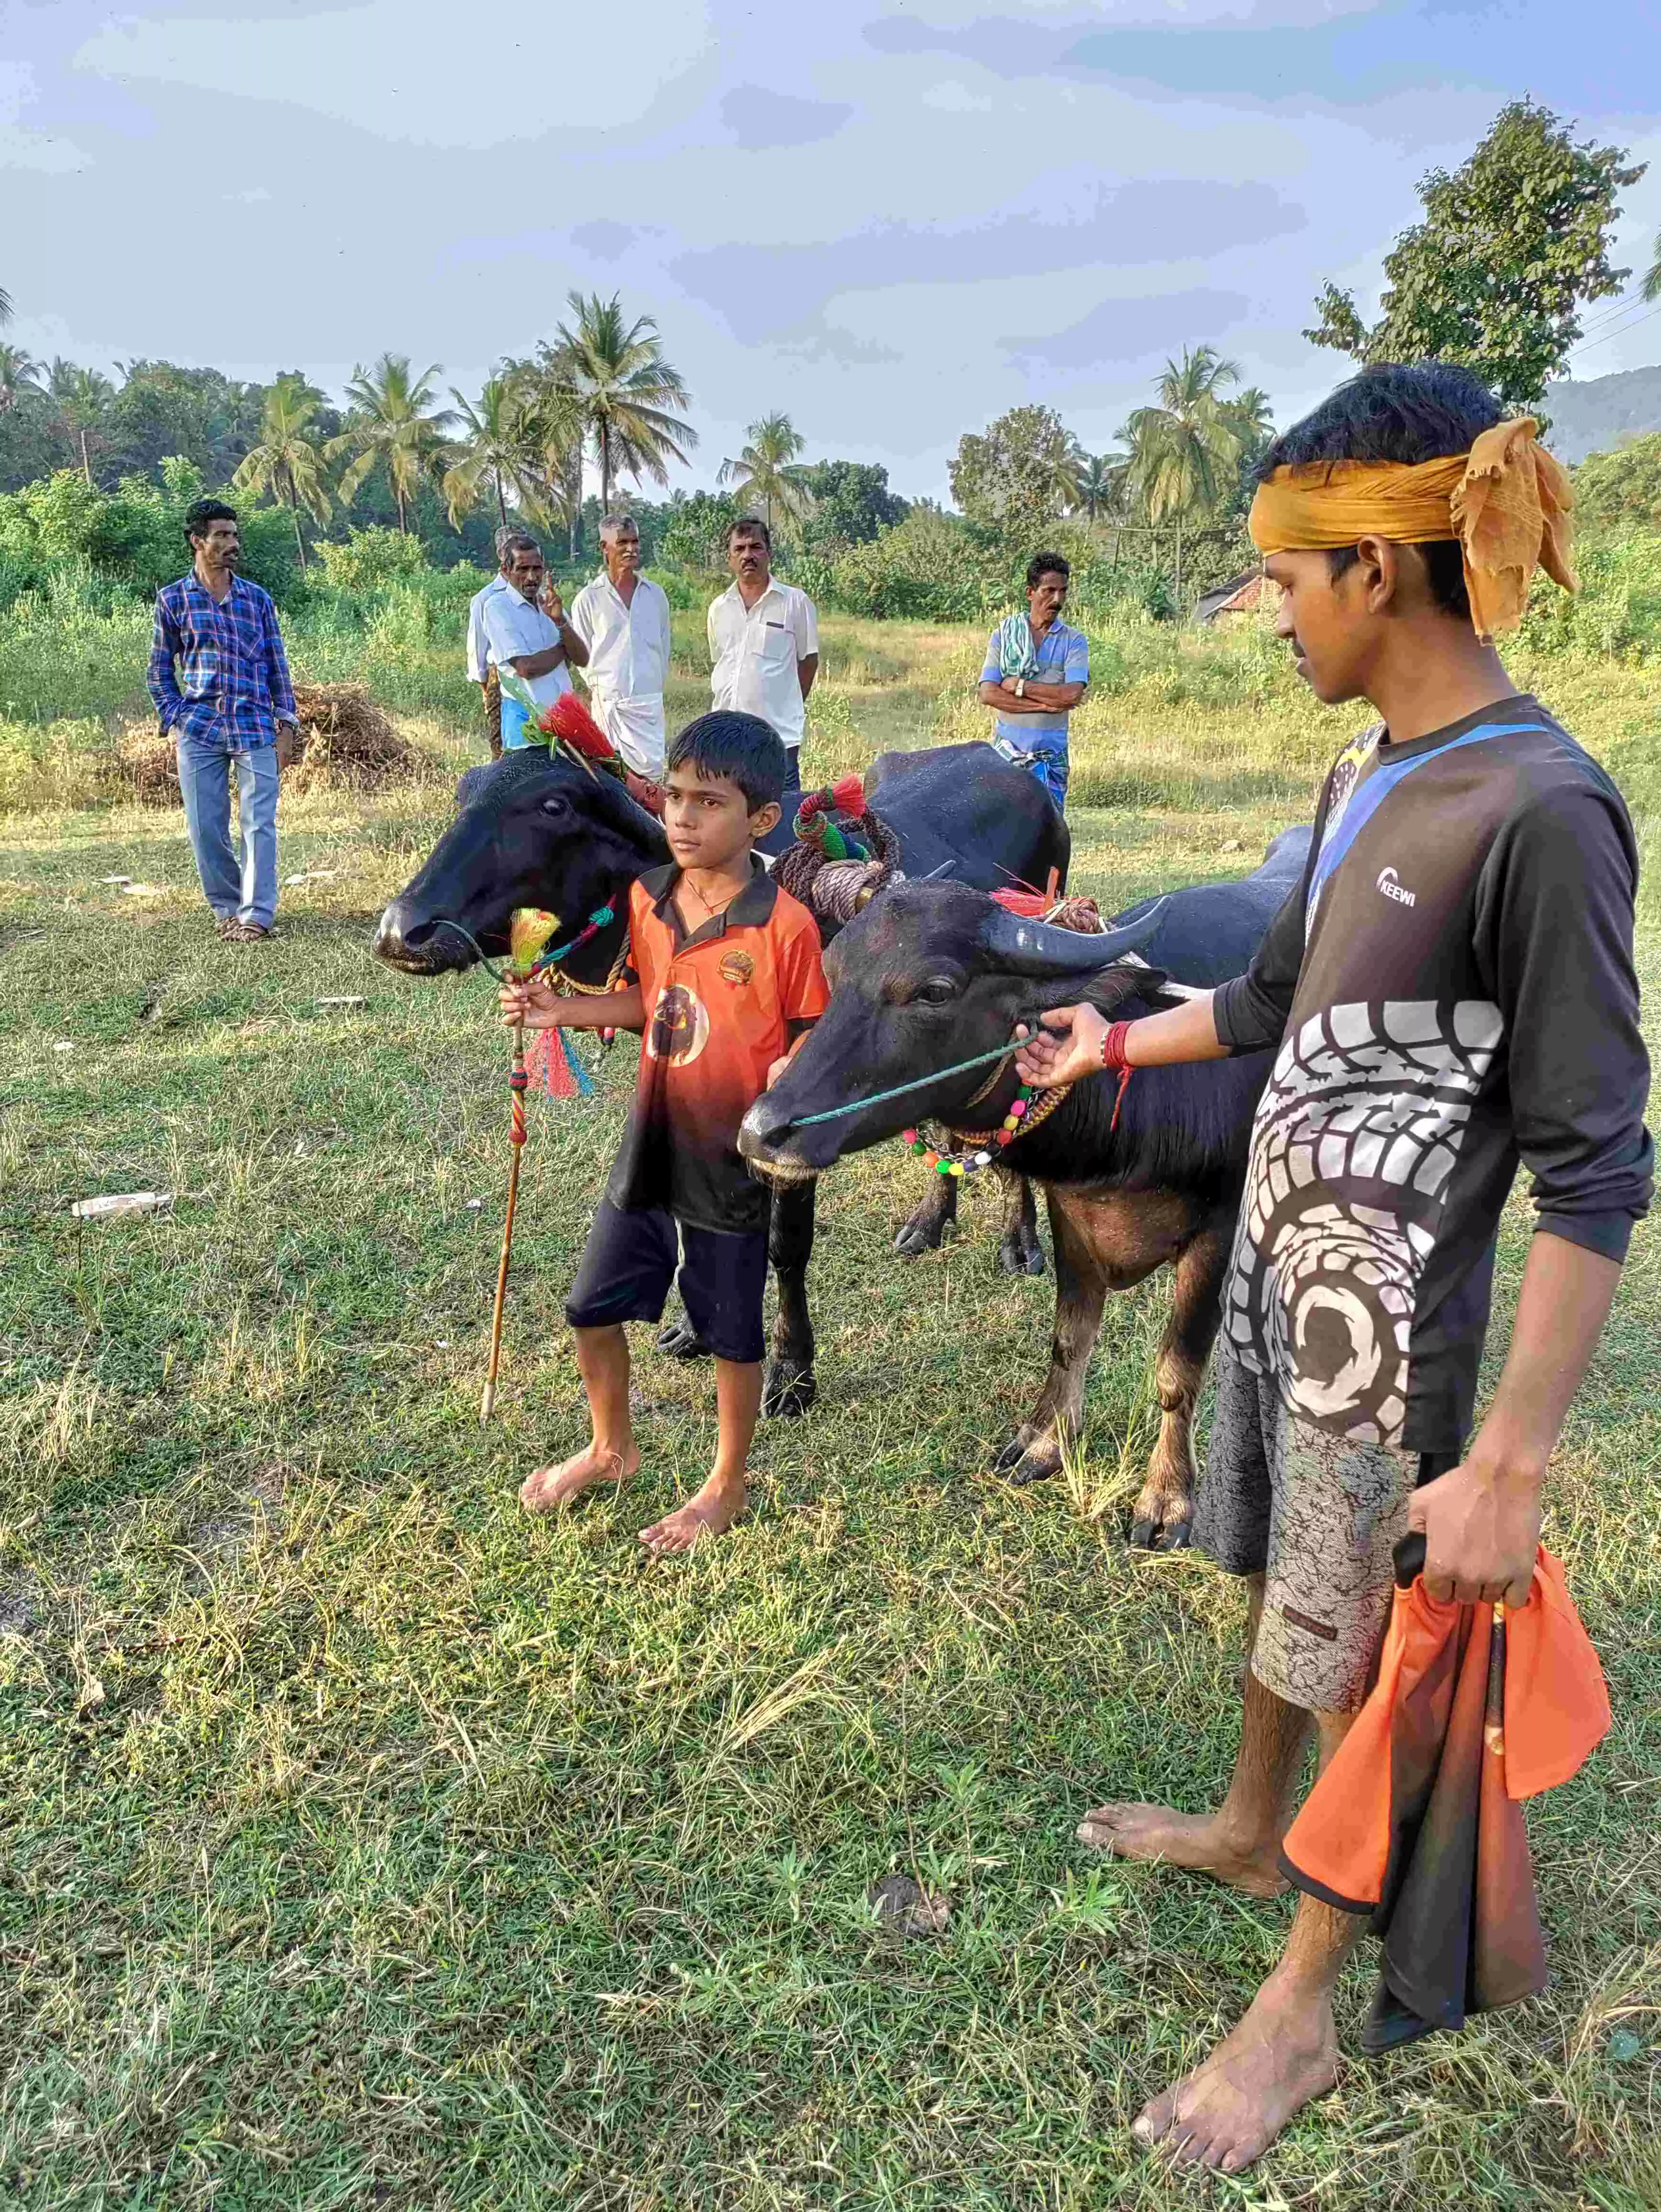 Being a kambala runner is a dream for numerous young boys in Tulu Nadu; but for girls, their involvement with the sport is currently restricted to taking care of the buffaloes.